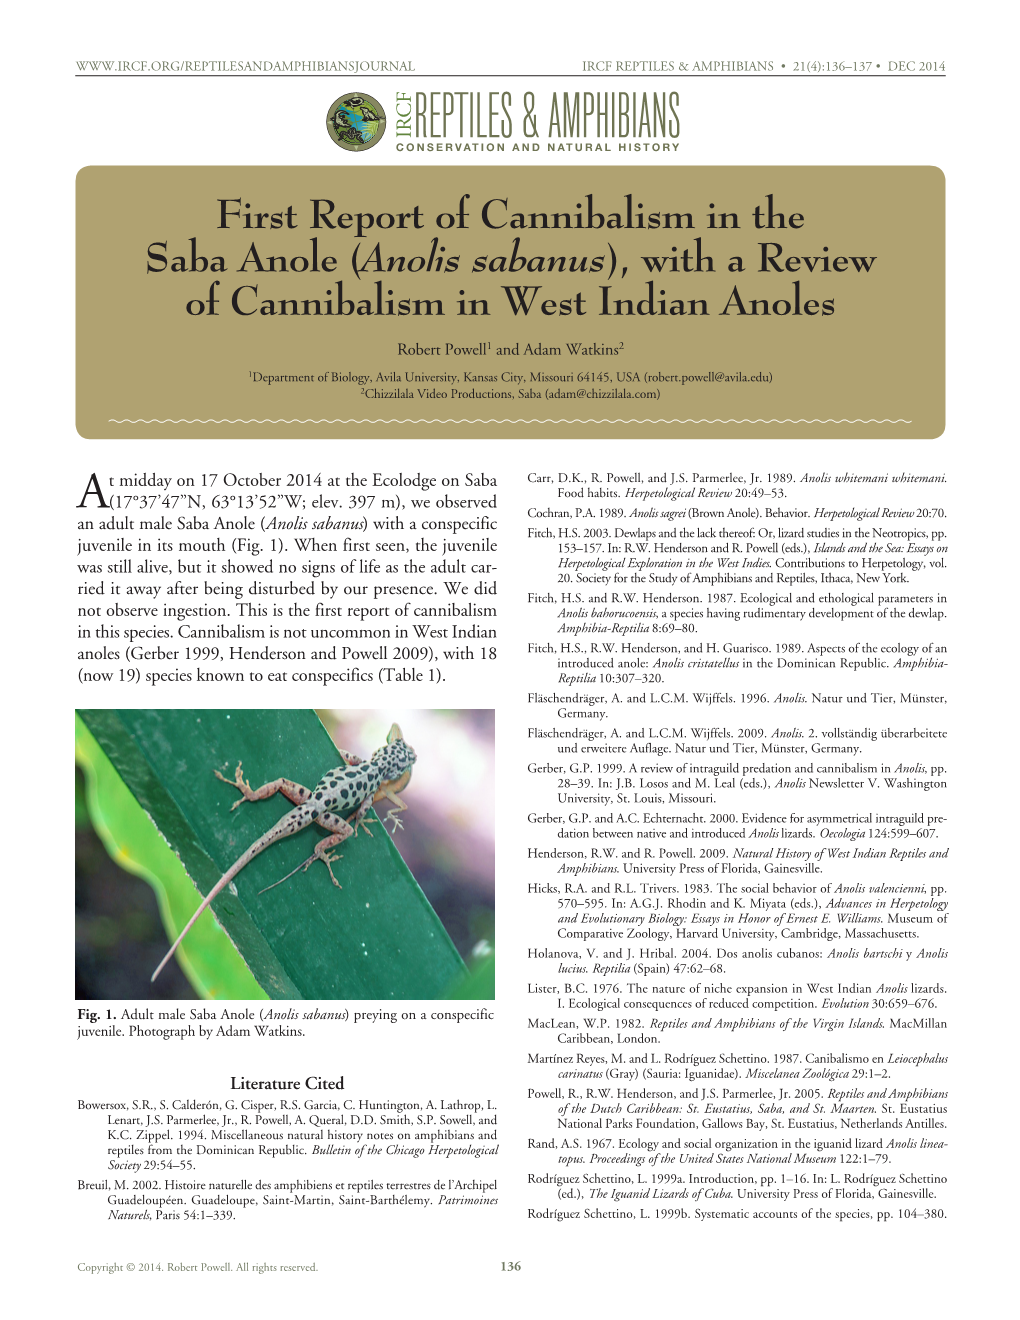 First Report of Cannibalism in the Saba Anole